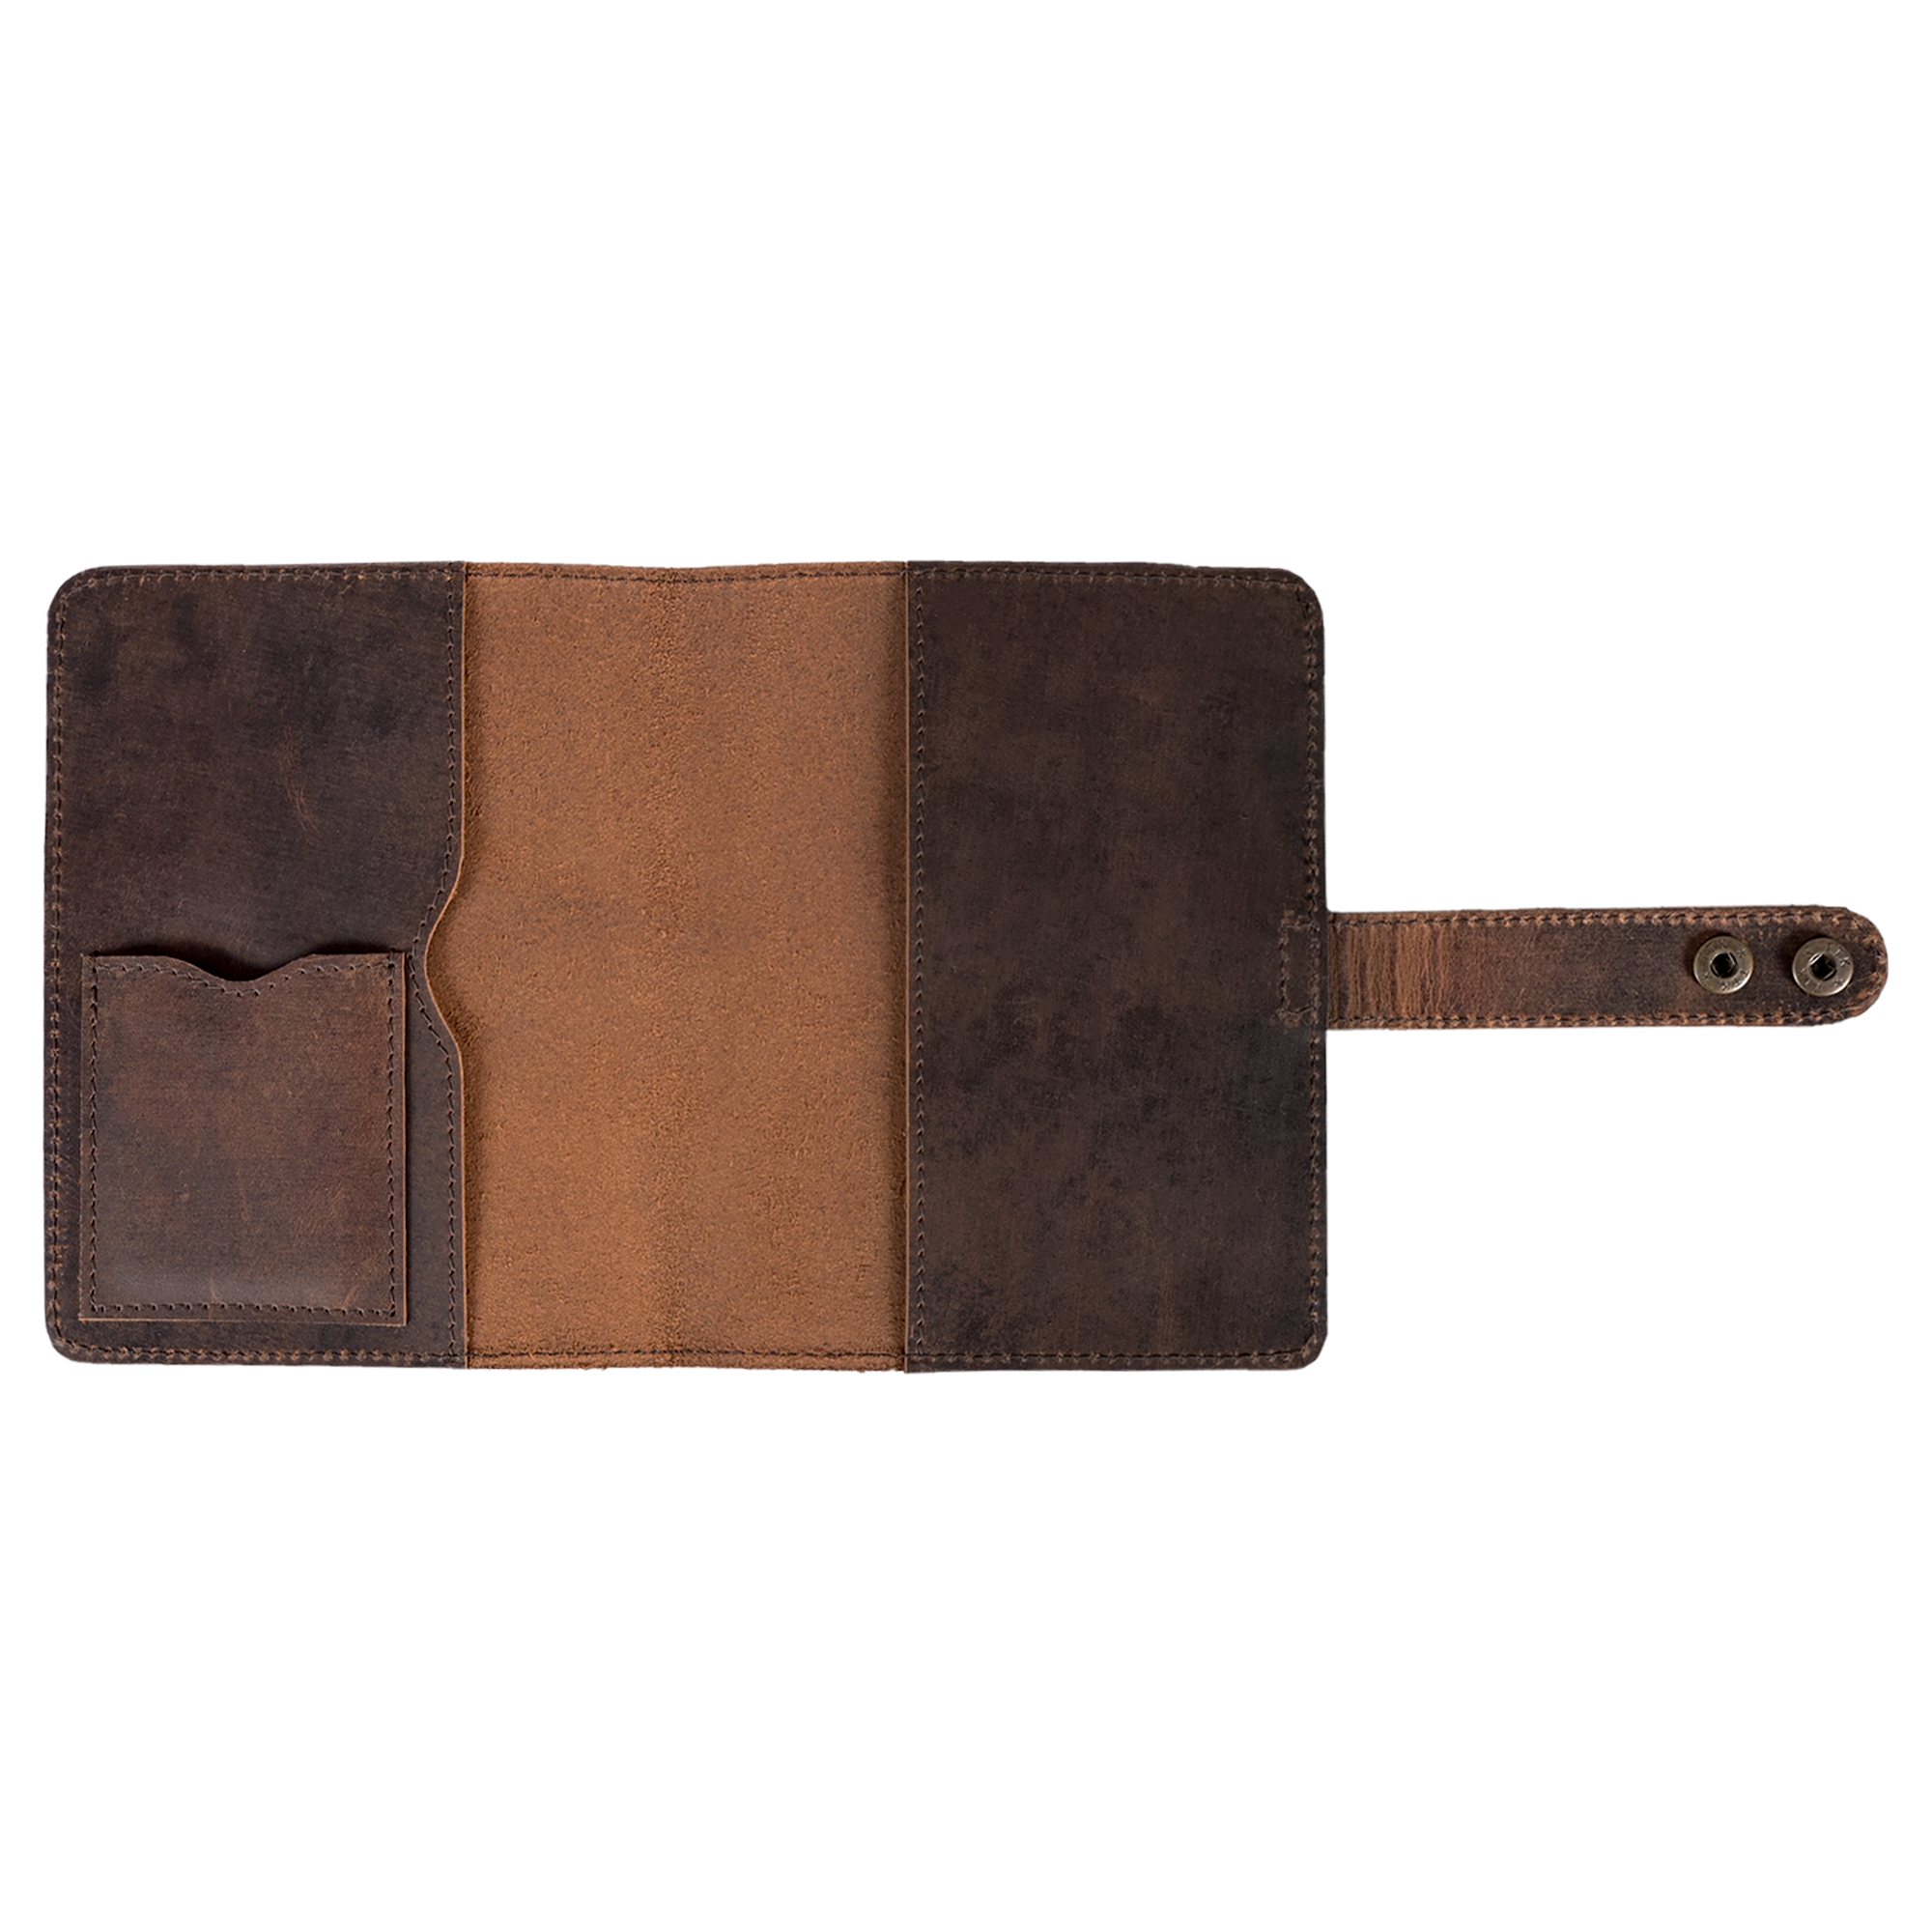 Standard Compact Leather Bible Cover